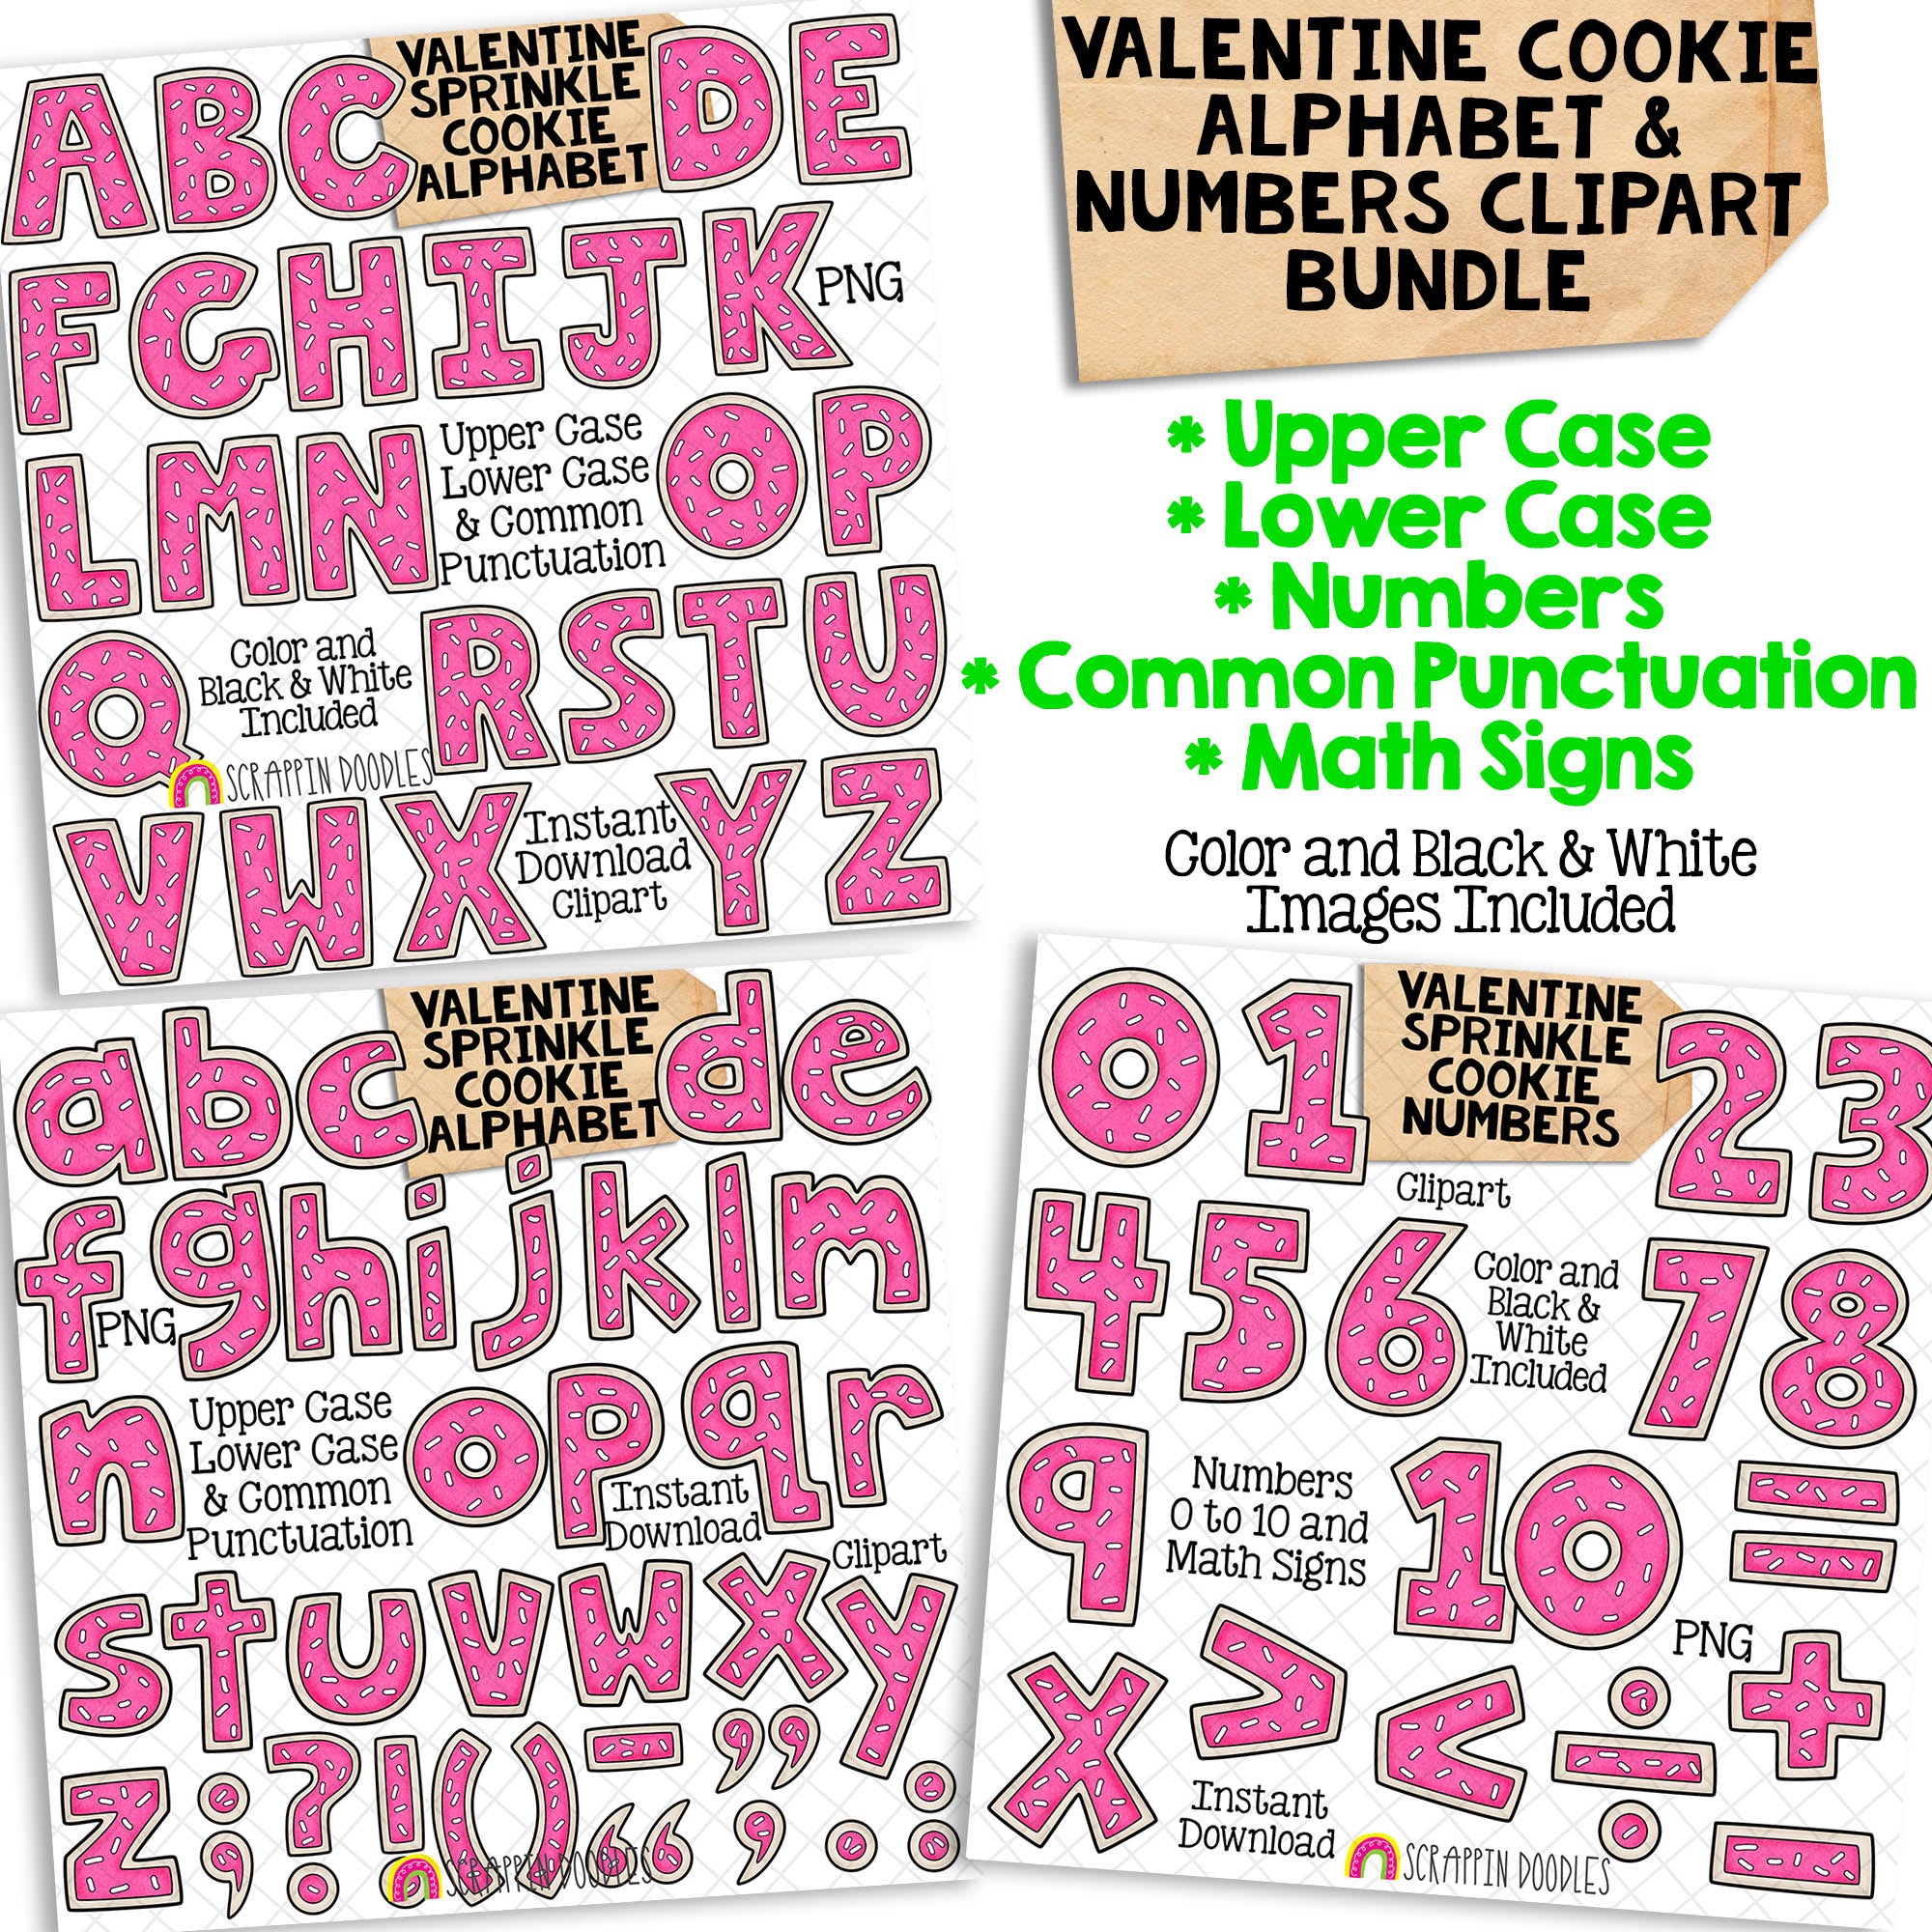 Valentine Cookie Alphabet ClipArt - Pink Sprinkle Cookie Letters Clip –  Scrappin Doodles